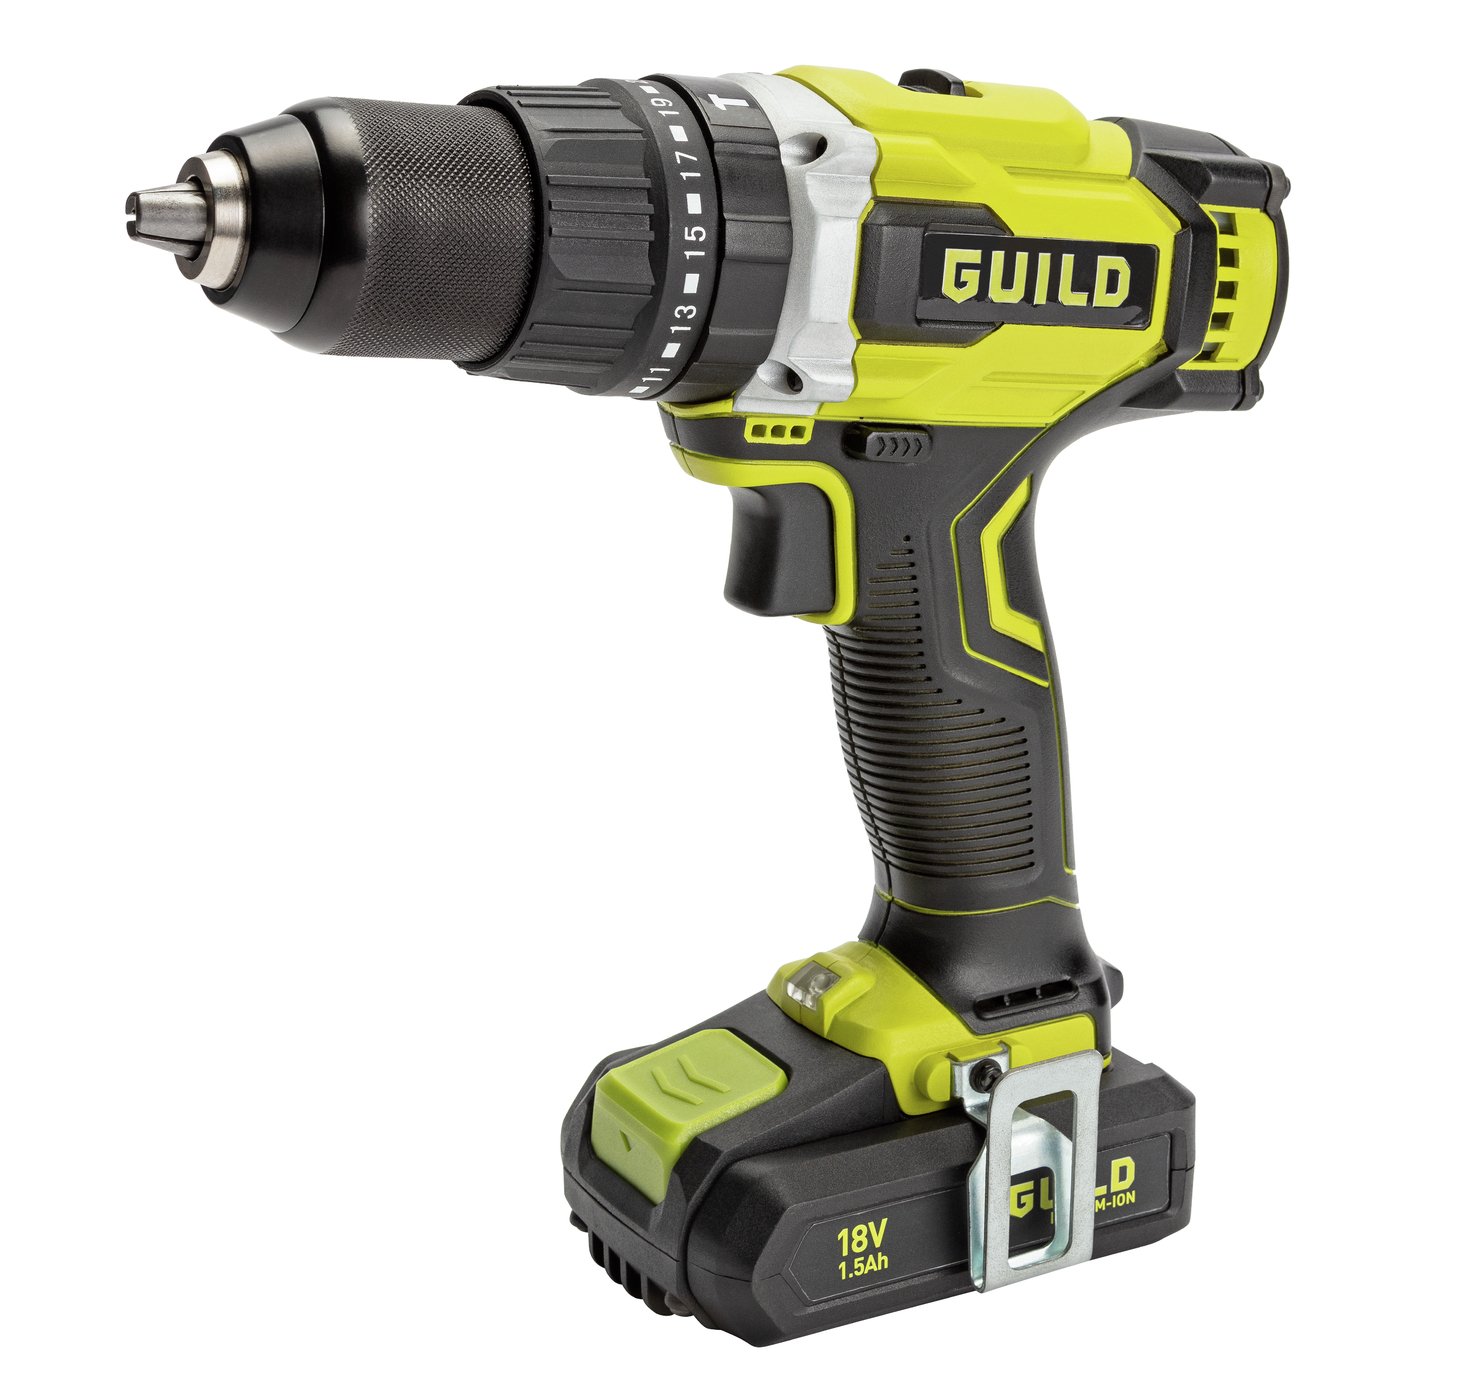 Guild Cordless Brushless Combi Drill Review